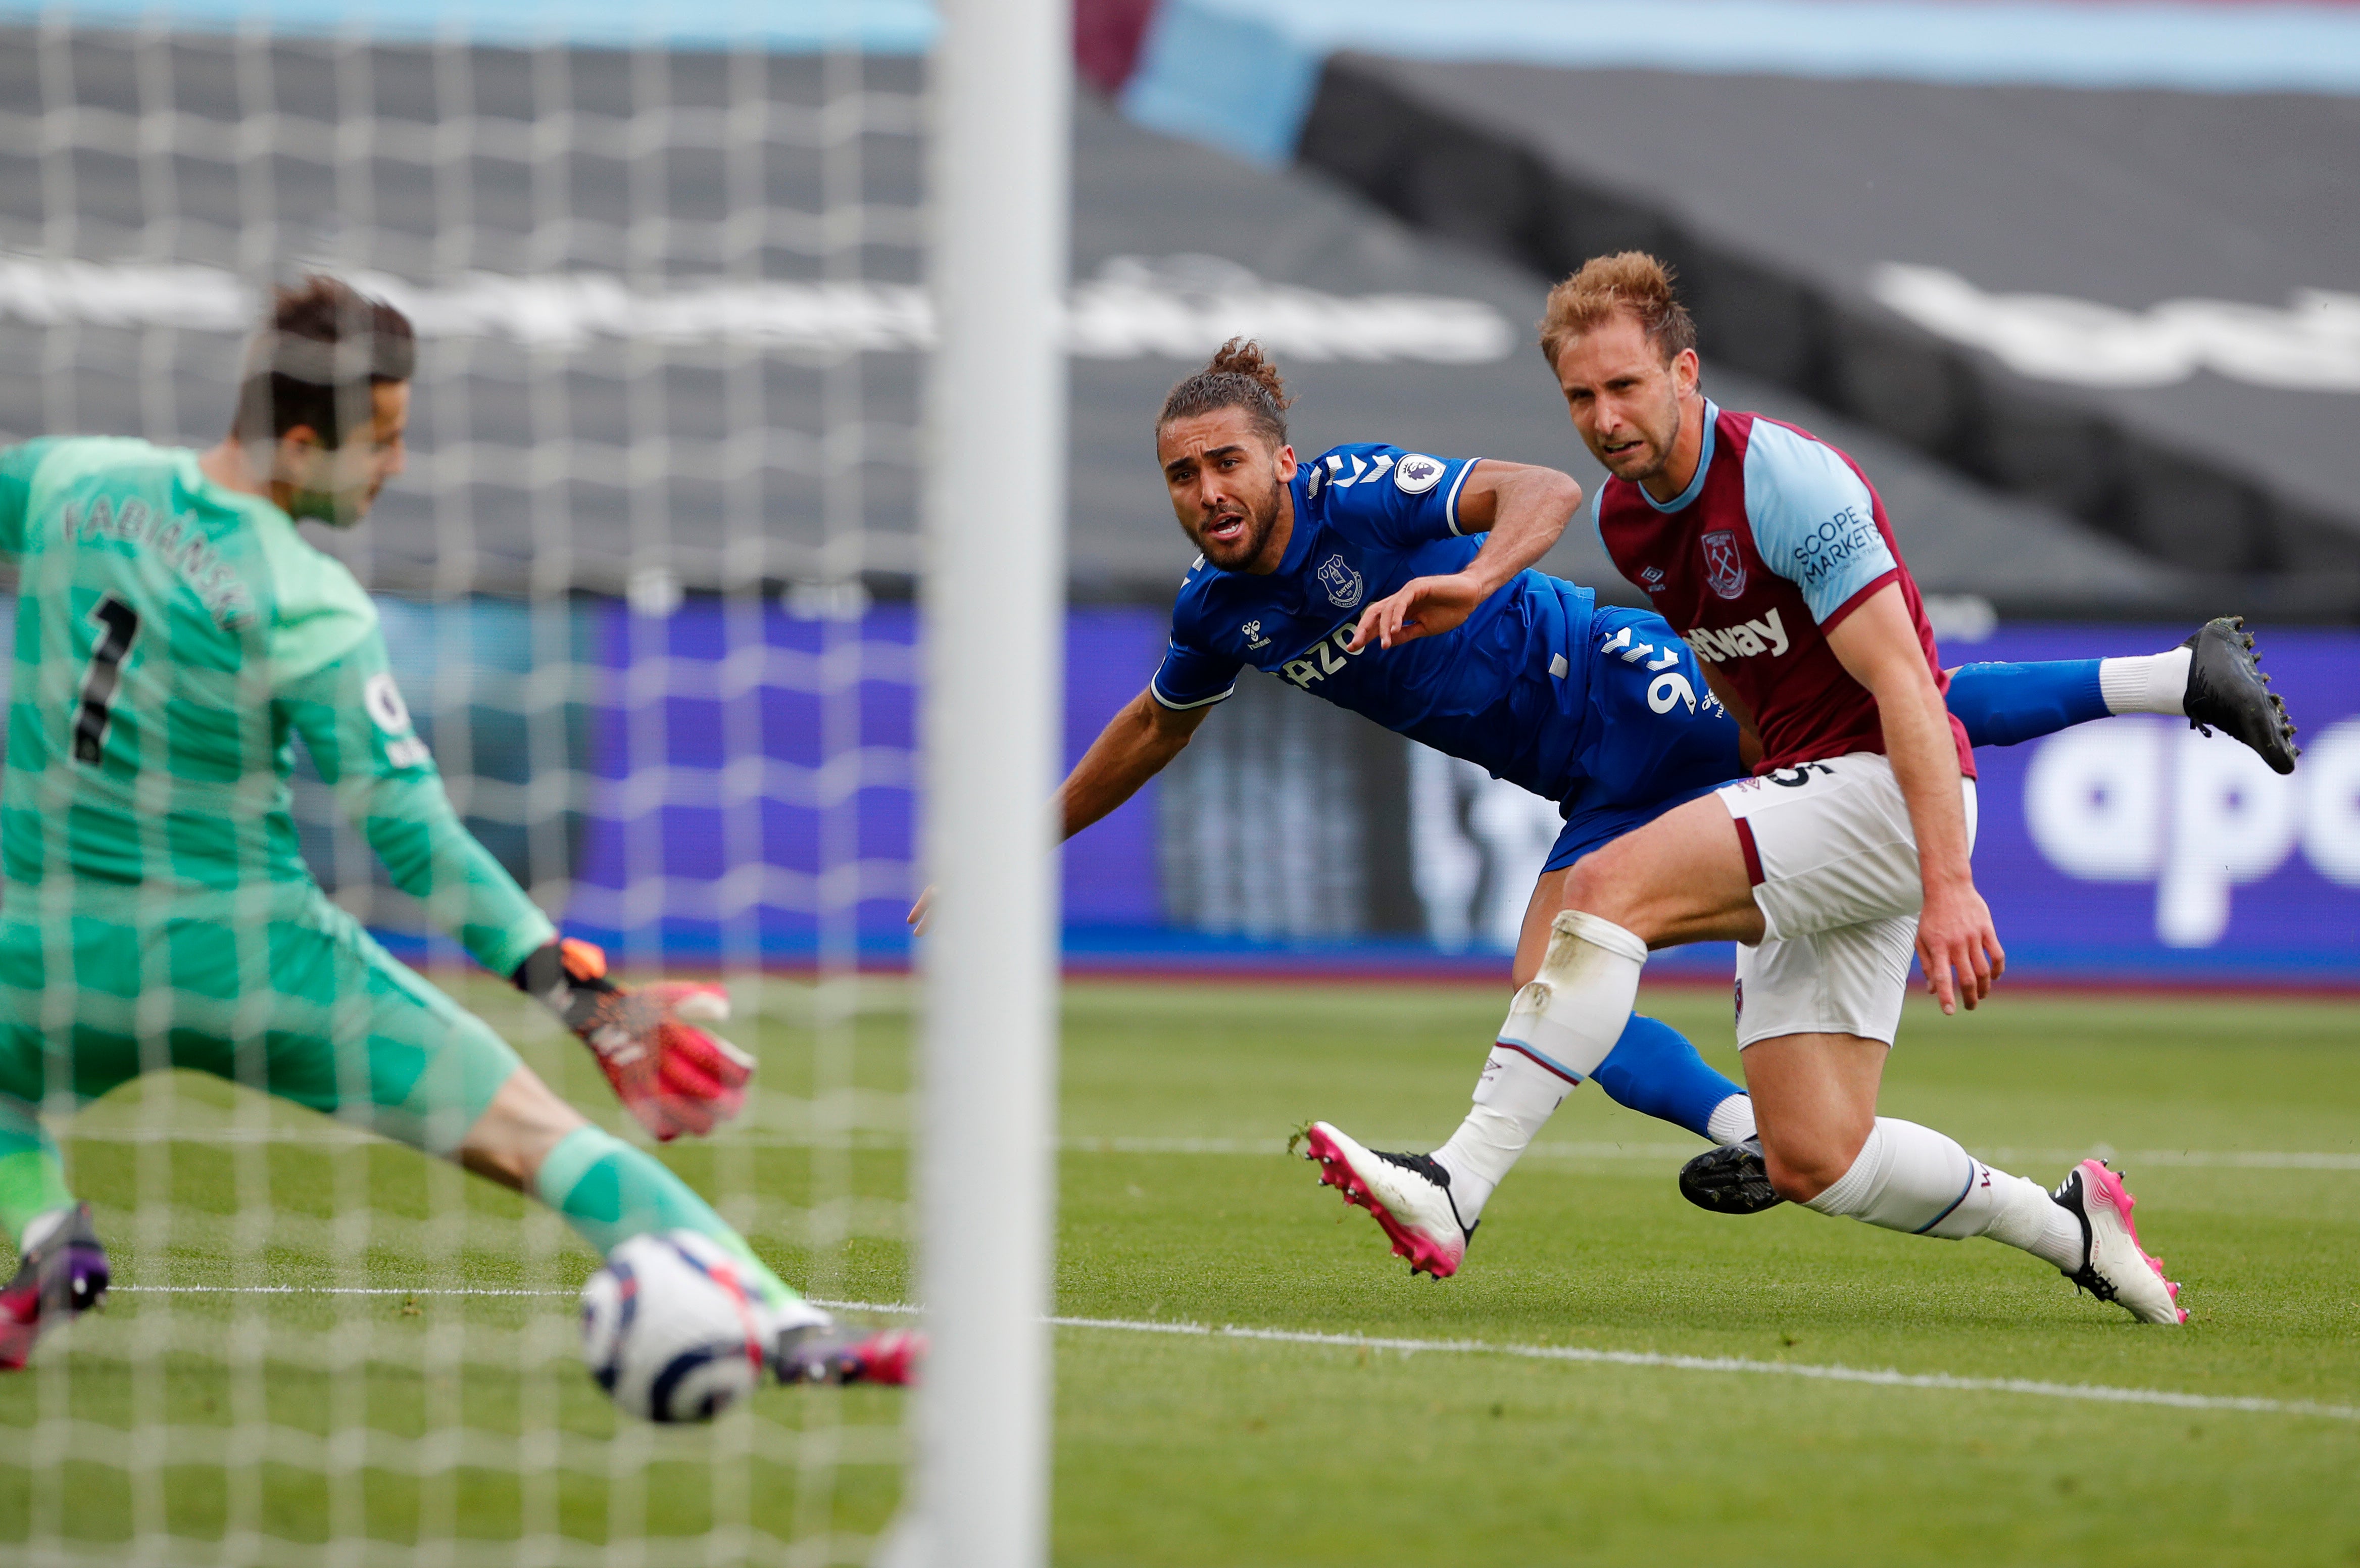 Everton boosted their hopes of qualifying for Europe with a win at West Ham